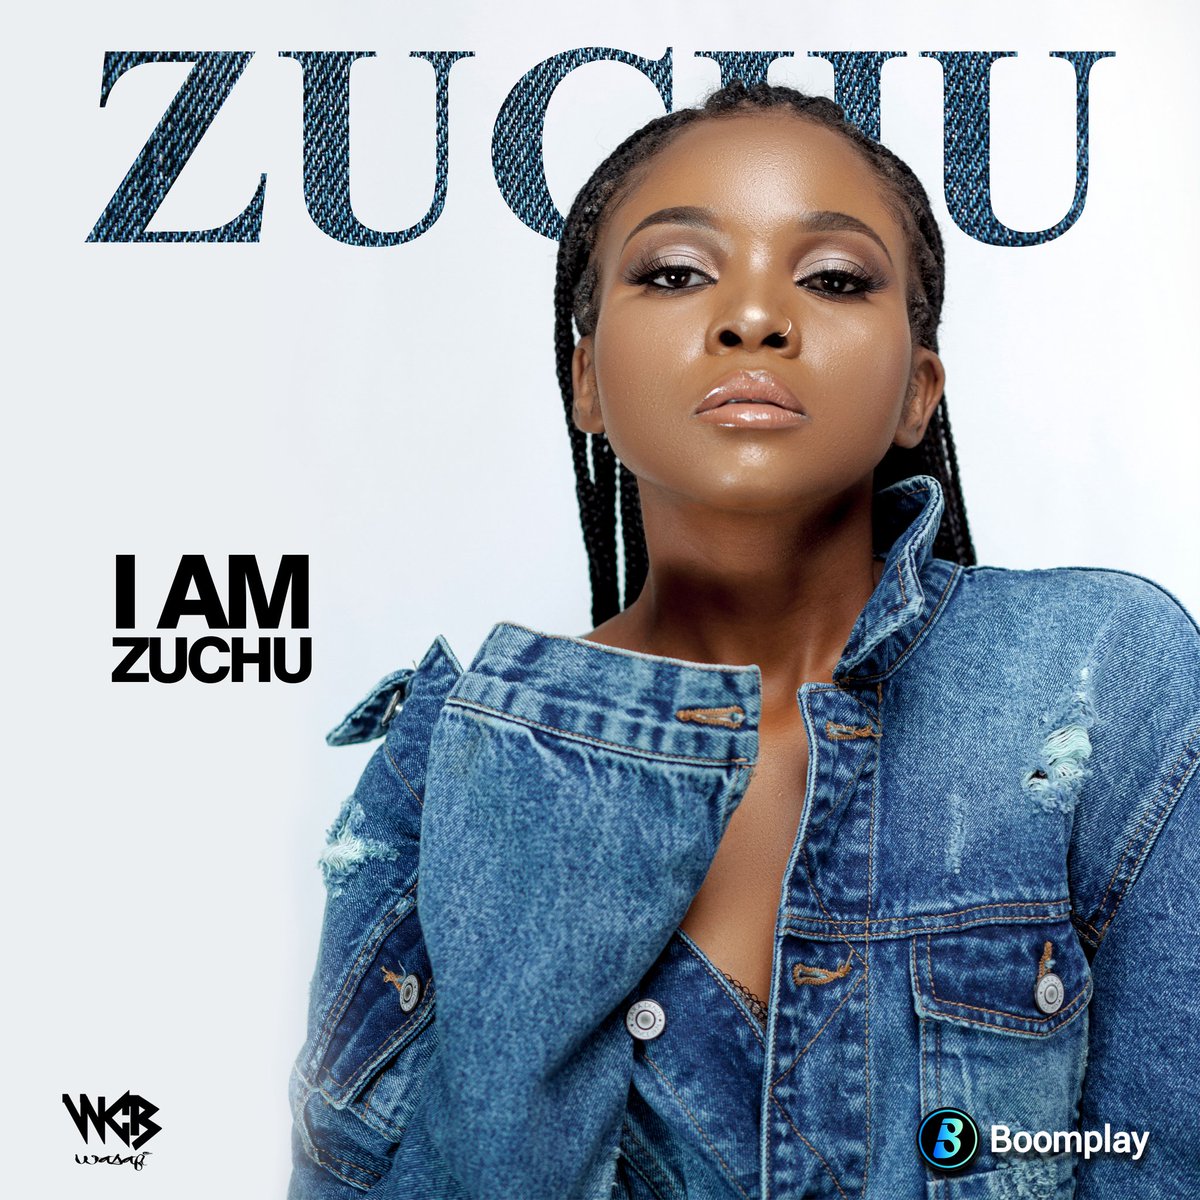 SUNDAY, April 12th 2020 'I AM ZUCHU EP' @iamzuchuEp by @officialzuchu TO BE LAUNCHED & RELEASED.....Track List Reveal , tomorrow FRIDAY 10th April 2020..... 🌍 @boomplaymusic_tz @wcb_wasafi #Hitsonly #WCB4LIFE